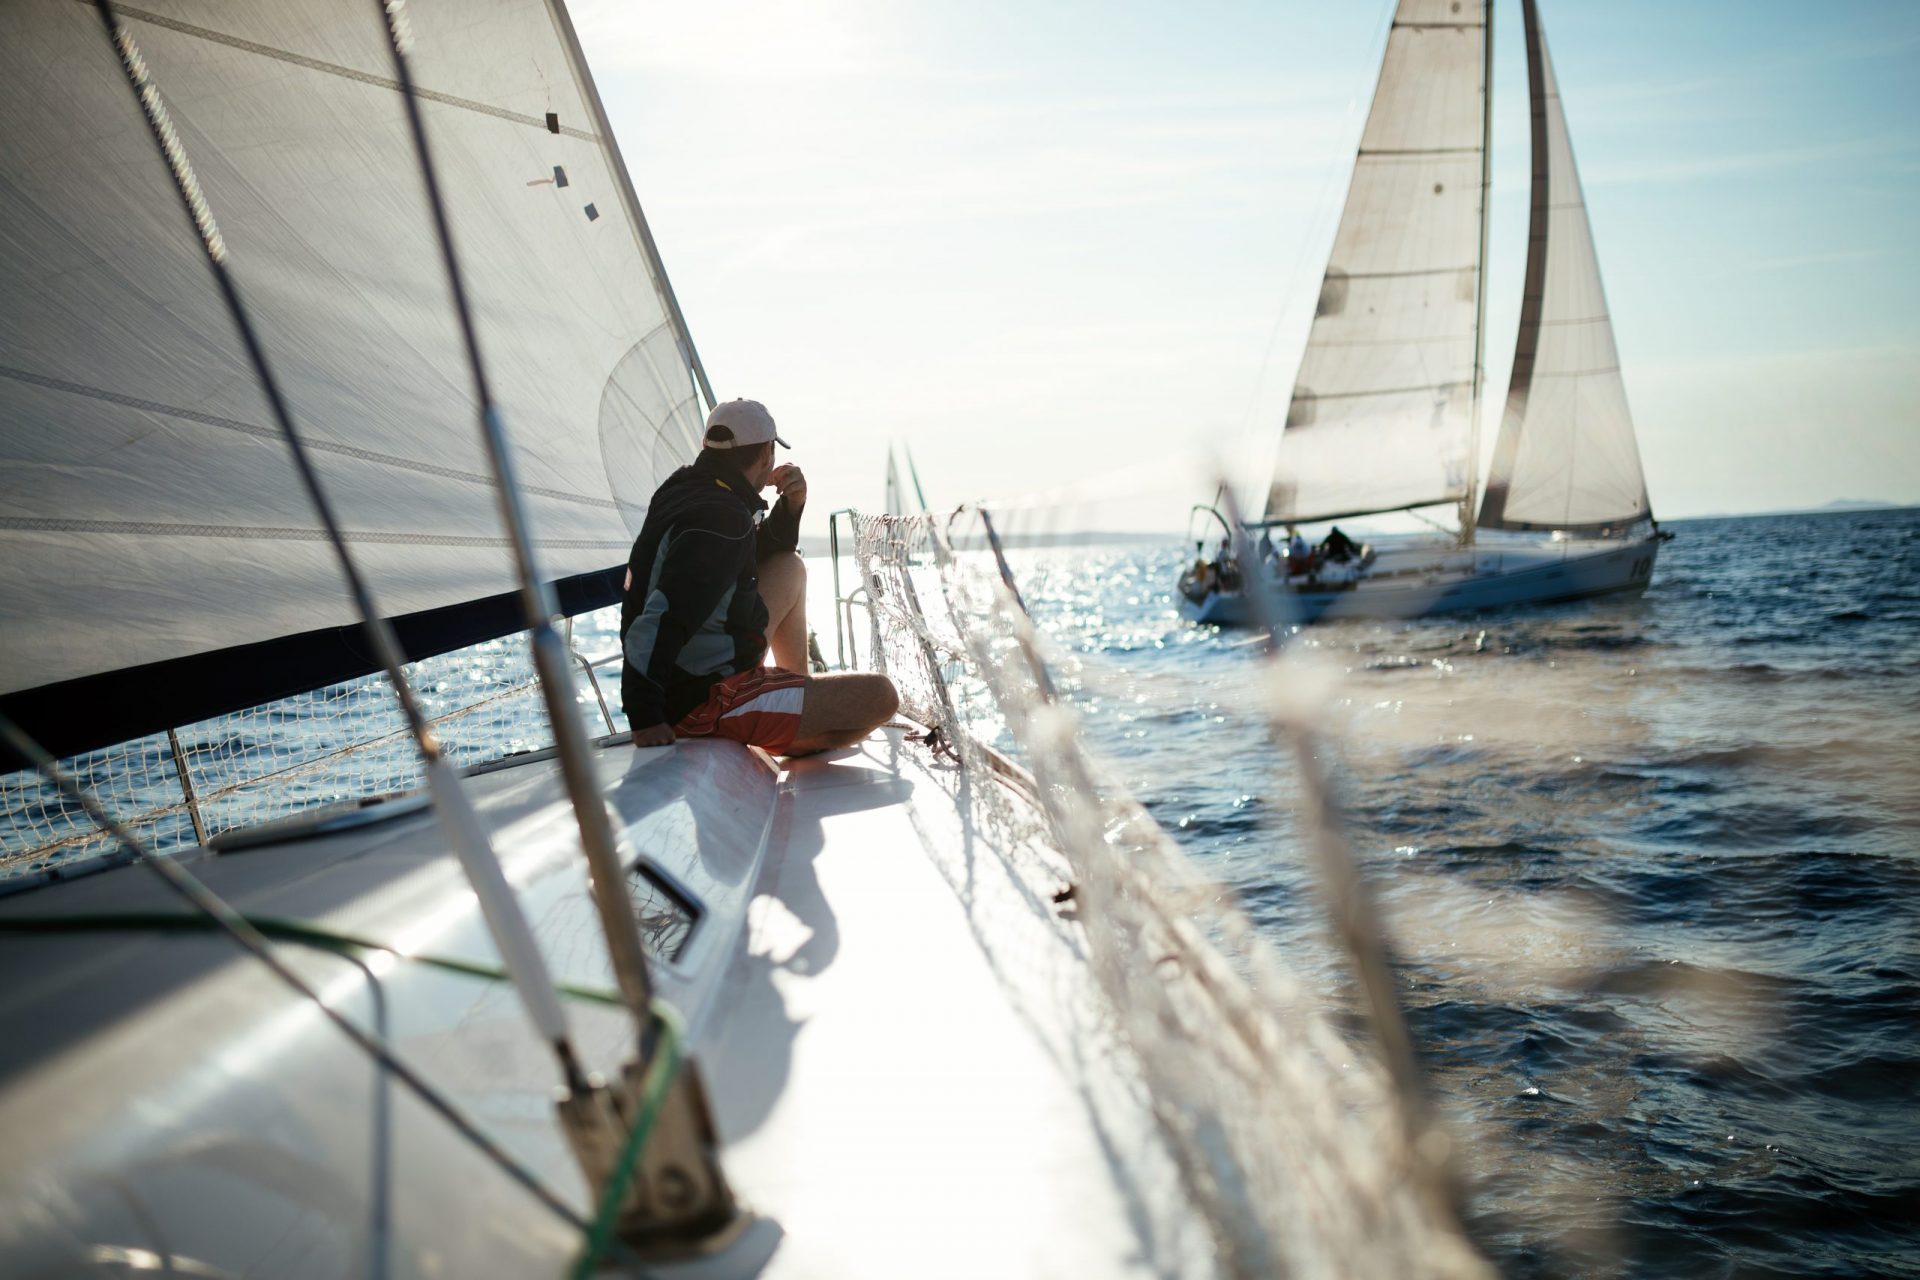 Sailing: How Difficult Is It?